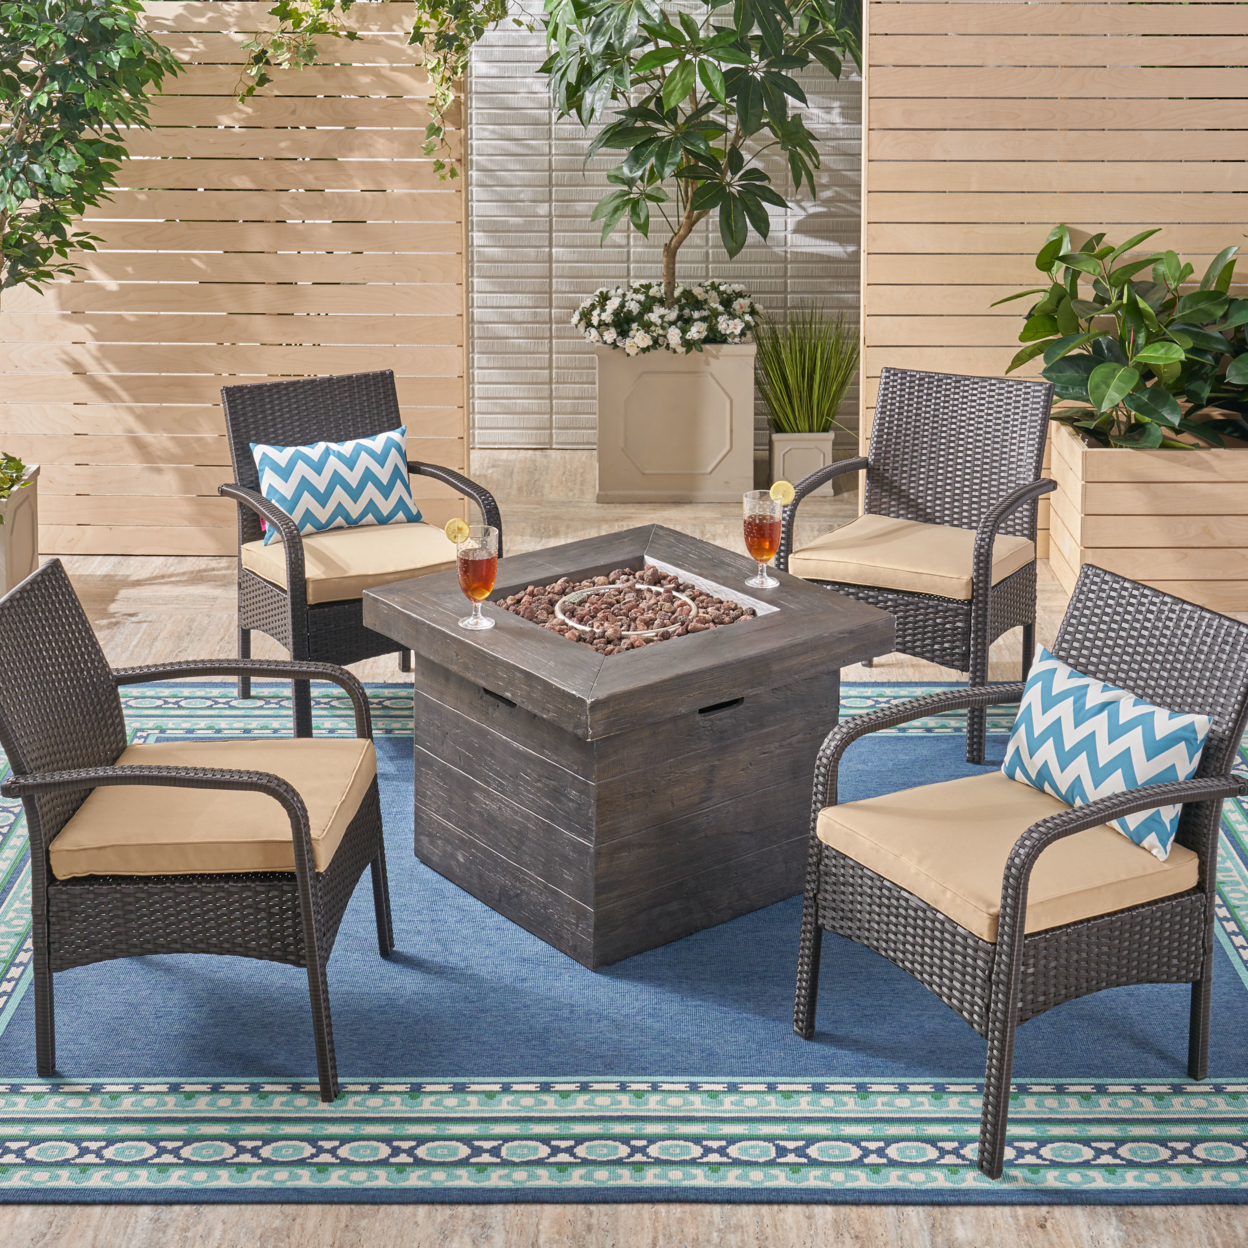 Meroy Patio Fire Pit Set, 4-Seater With Club Chairs, Wicker With Outdoor Cushions - Gray / Silver/ Gray